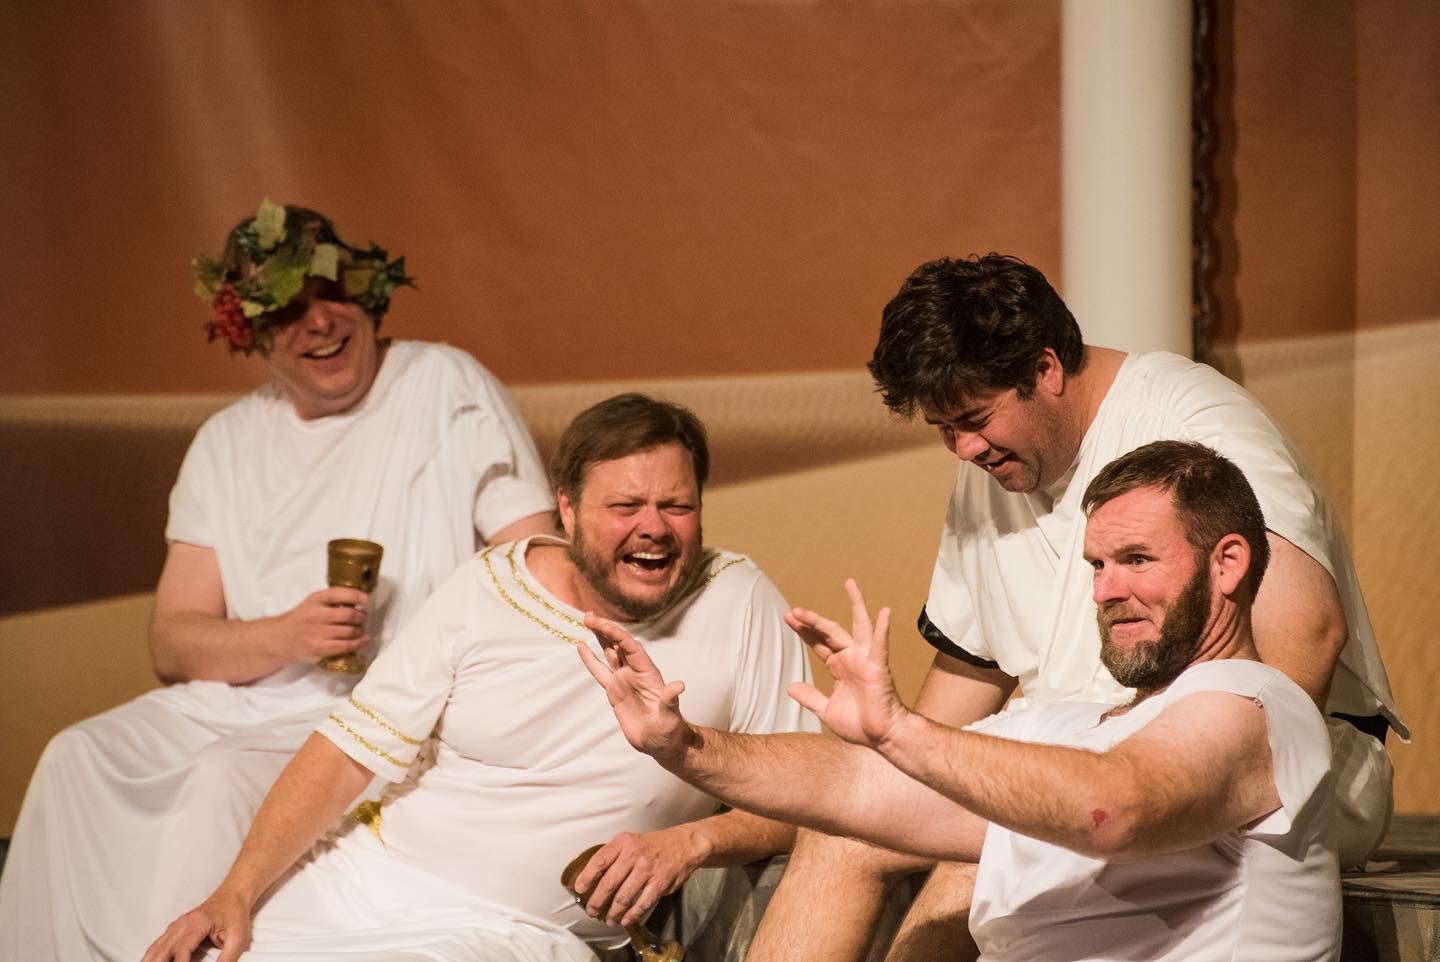 Men in white garments are seen laughing and chatting close together